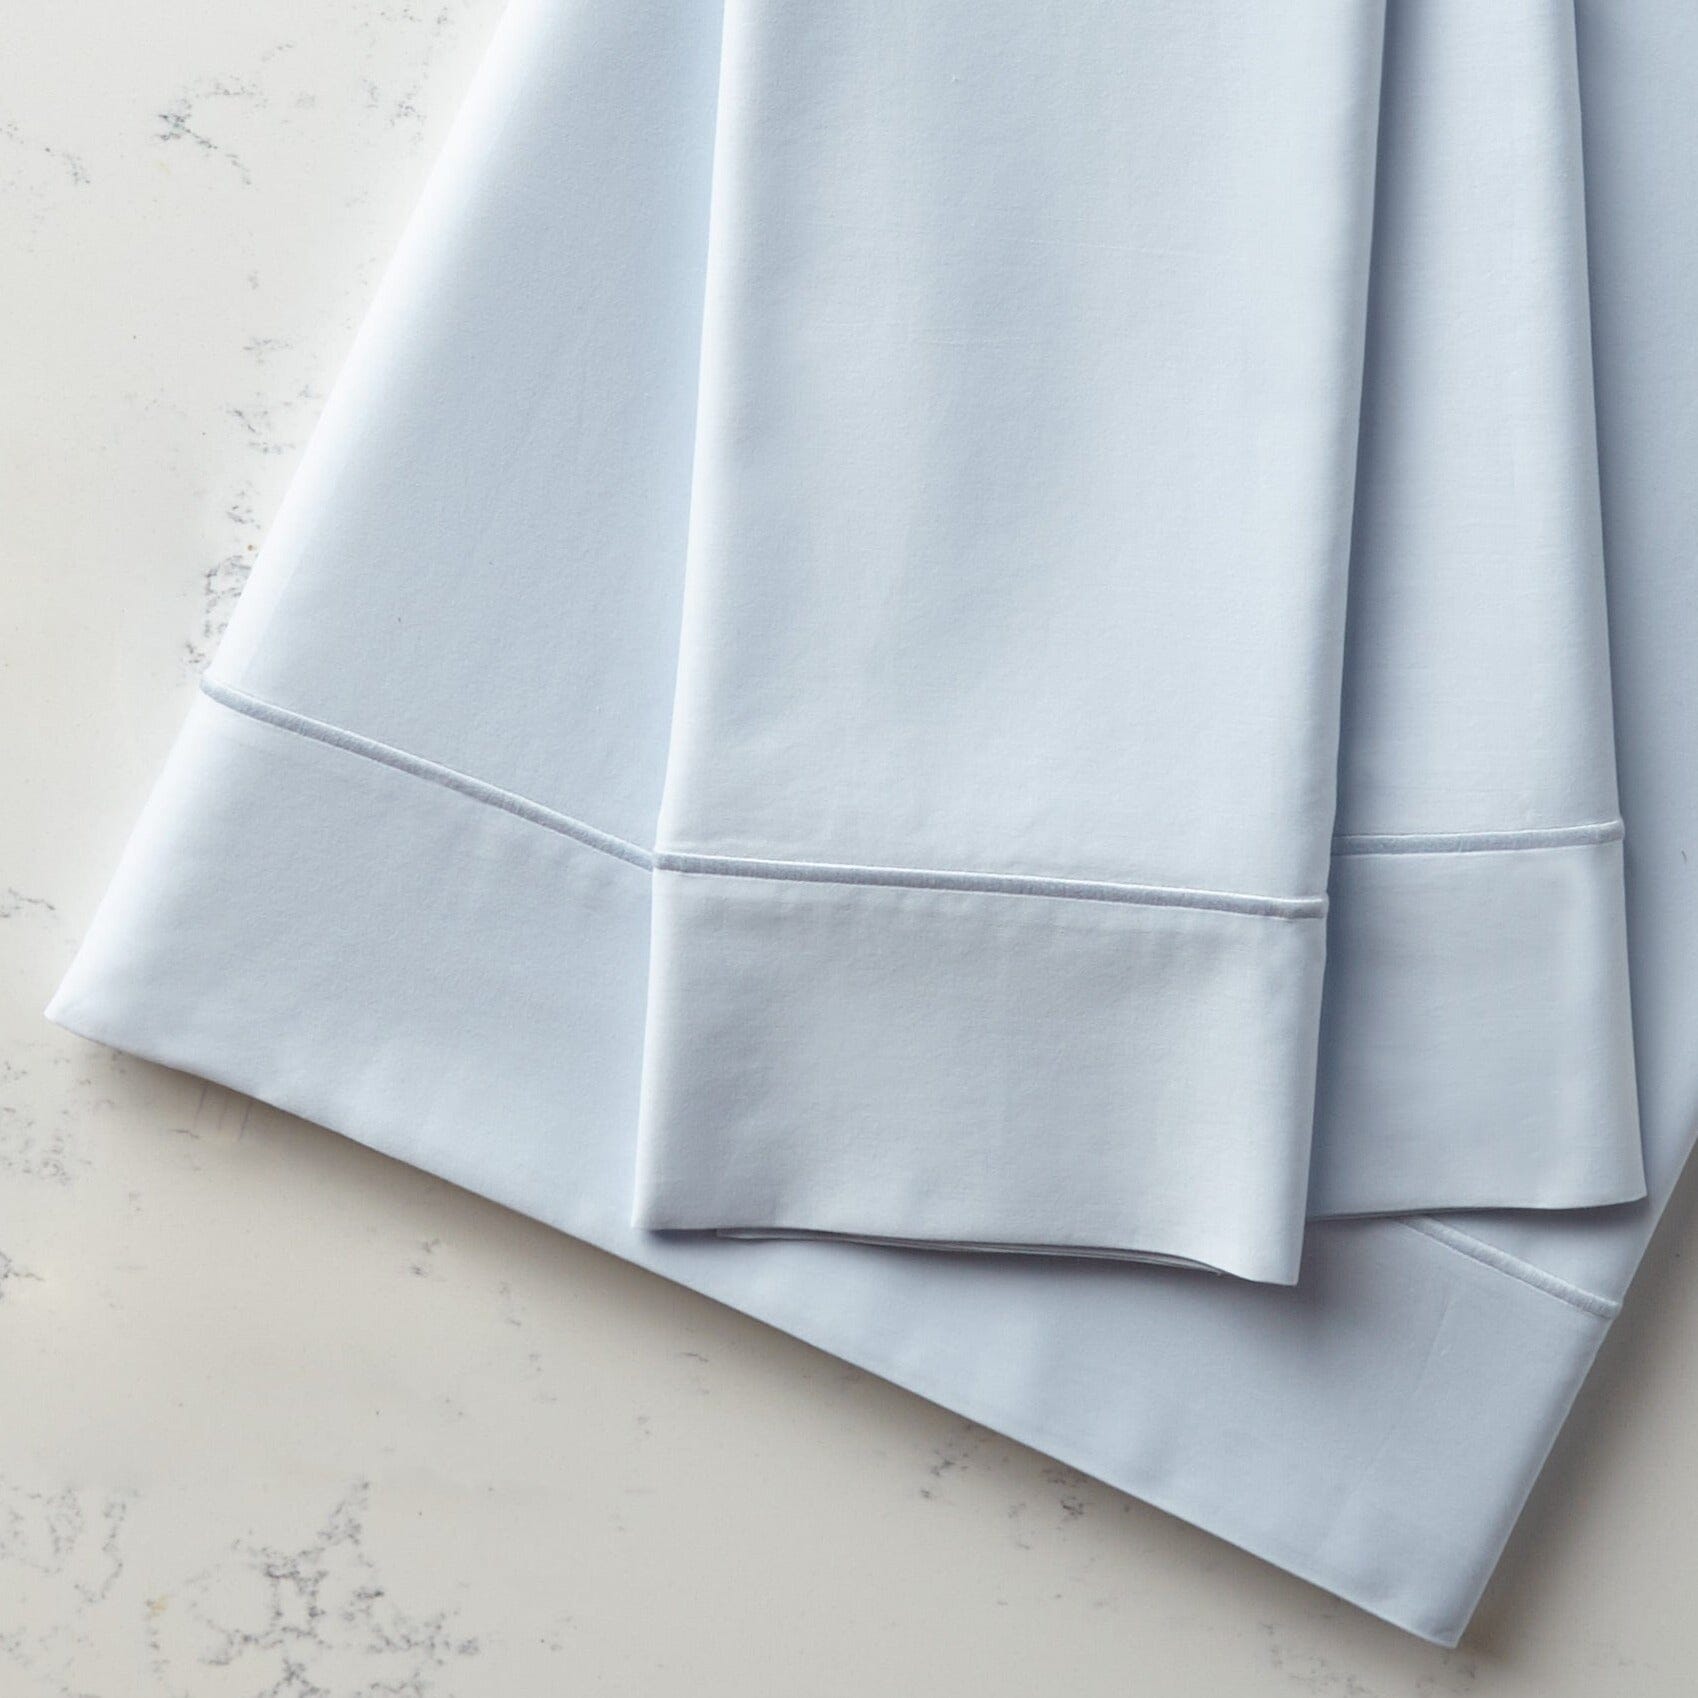 Satin Stitch Detail - Peacock Alley Soprano Barely Blue Bedding - Fig Linens and Home